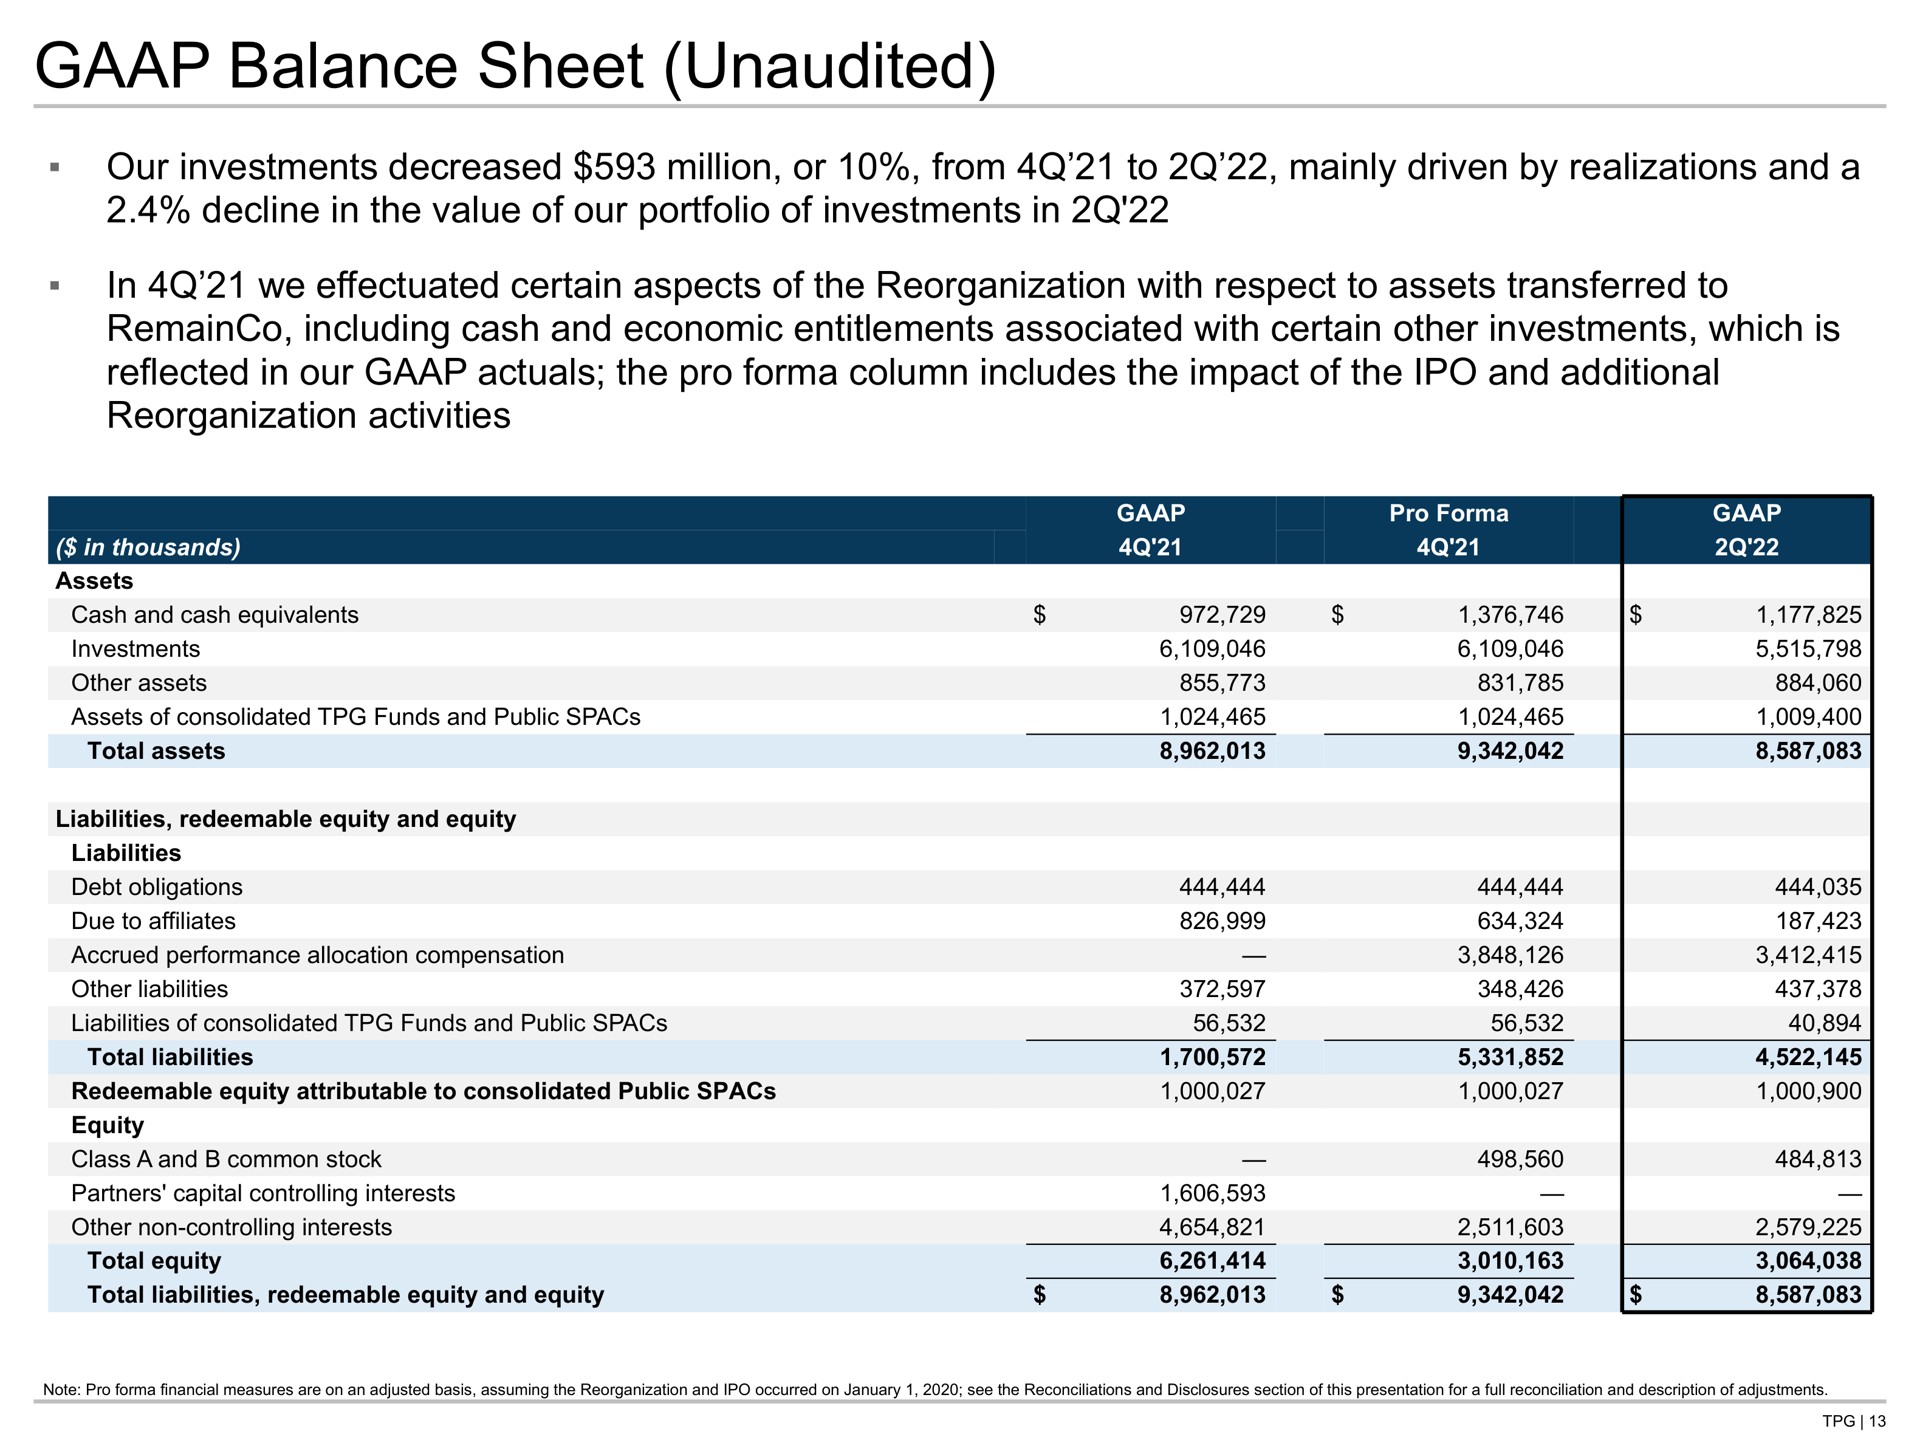 balance sheet unaudited our investments decreased million or from to mainly driven by realizations and a decline in the value of our portfolio of investments in in we effectuated certain aspects of the reorganization with respect to assets transferred to including cash and economic entitlements associated with certain other investments which is reflected in our the pro column includes the impact of the and additional reorganization activities | TPG